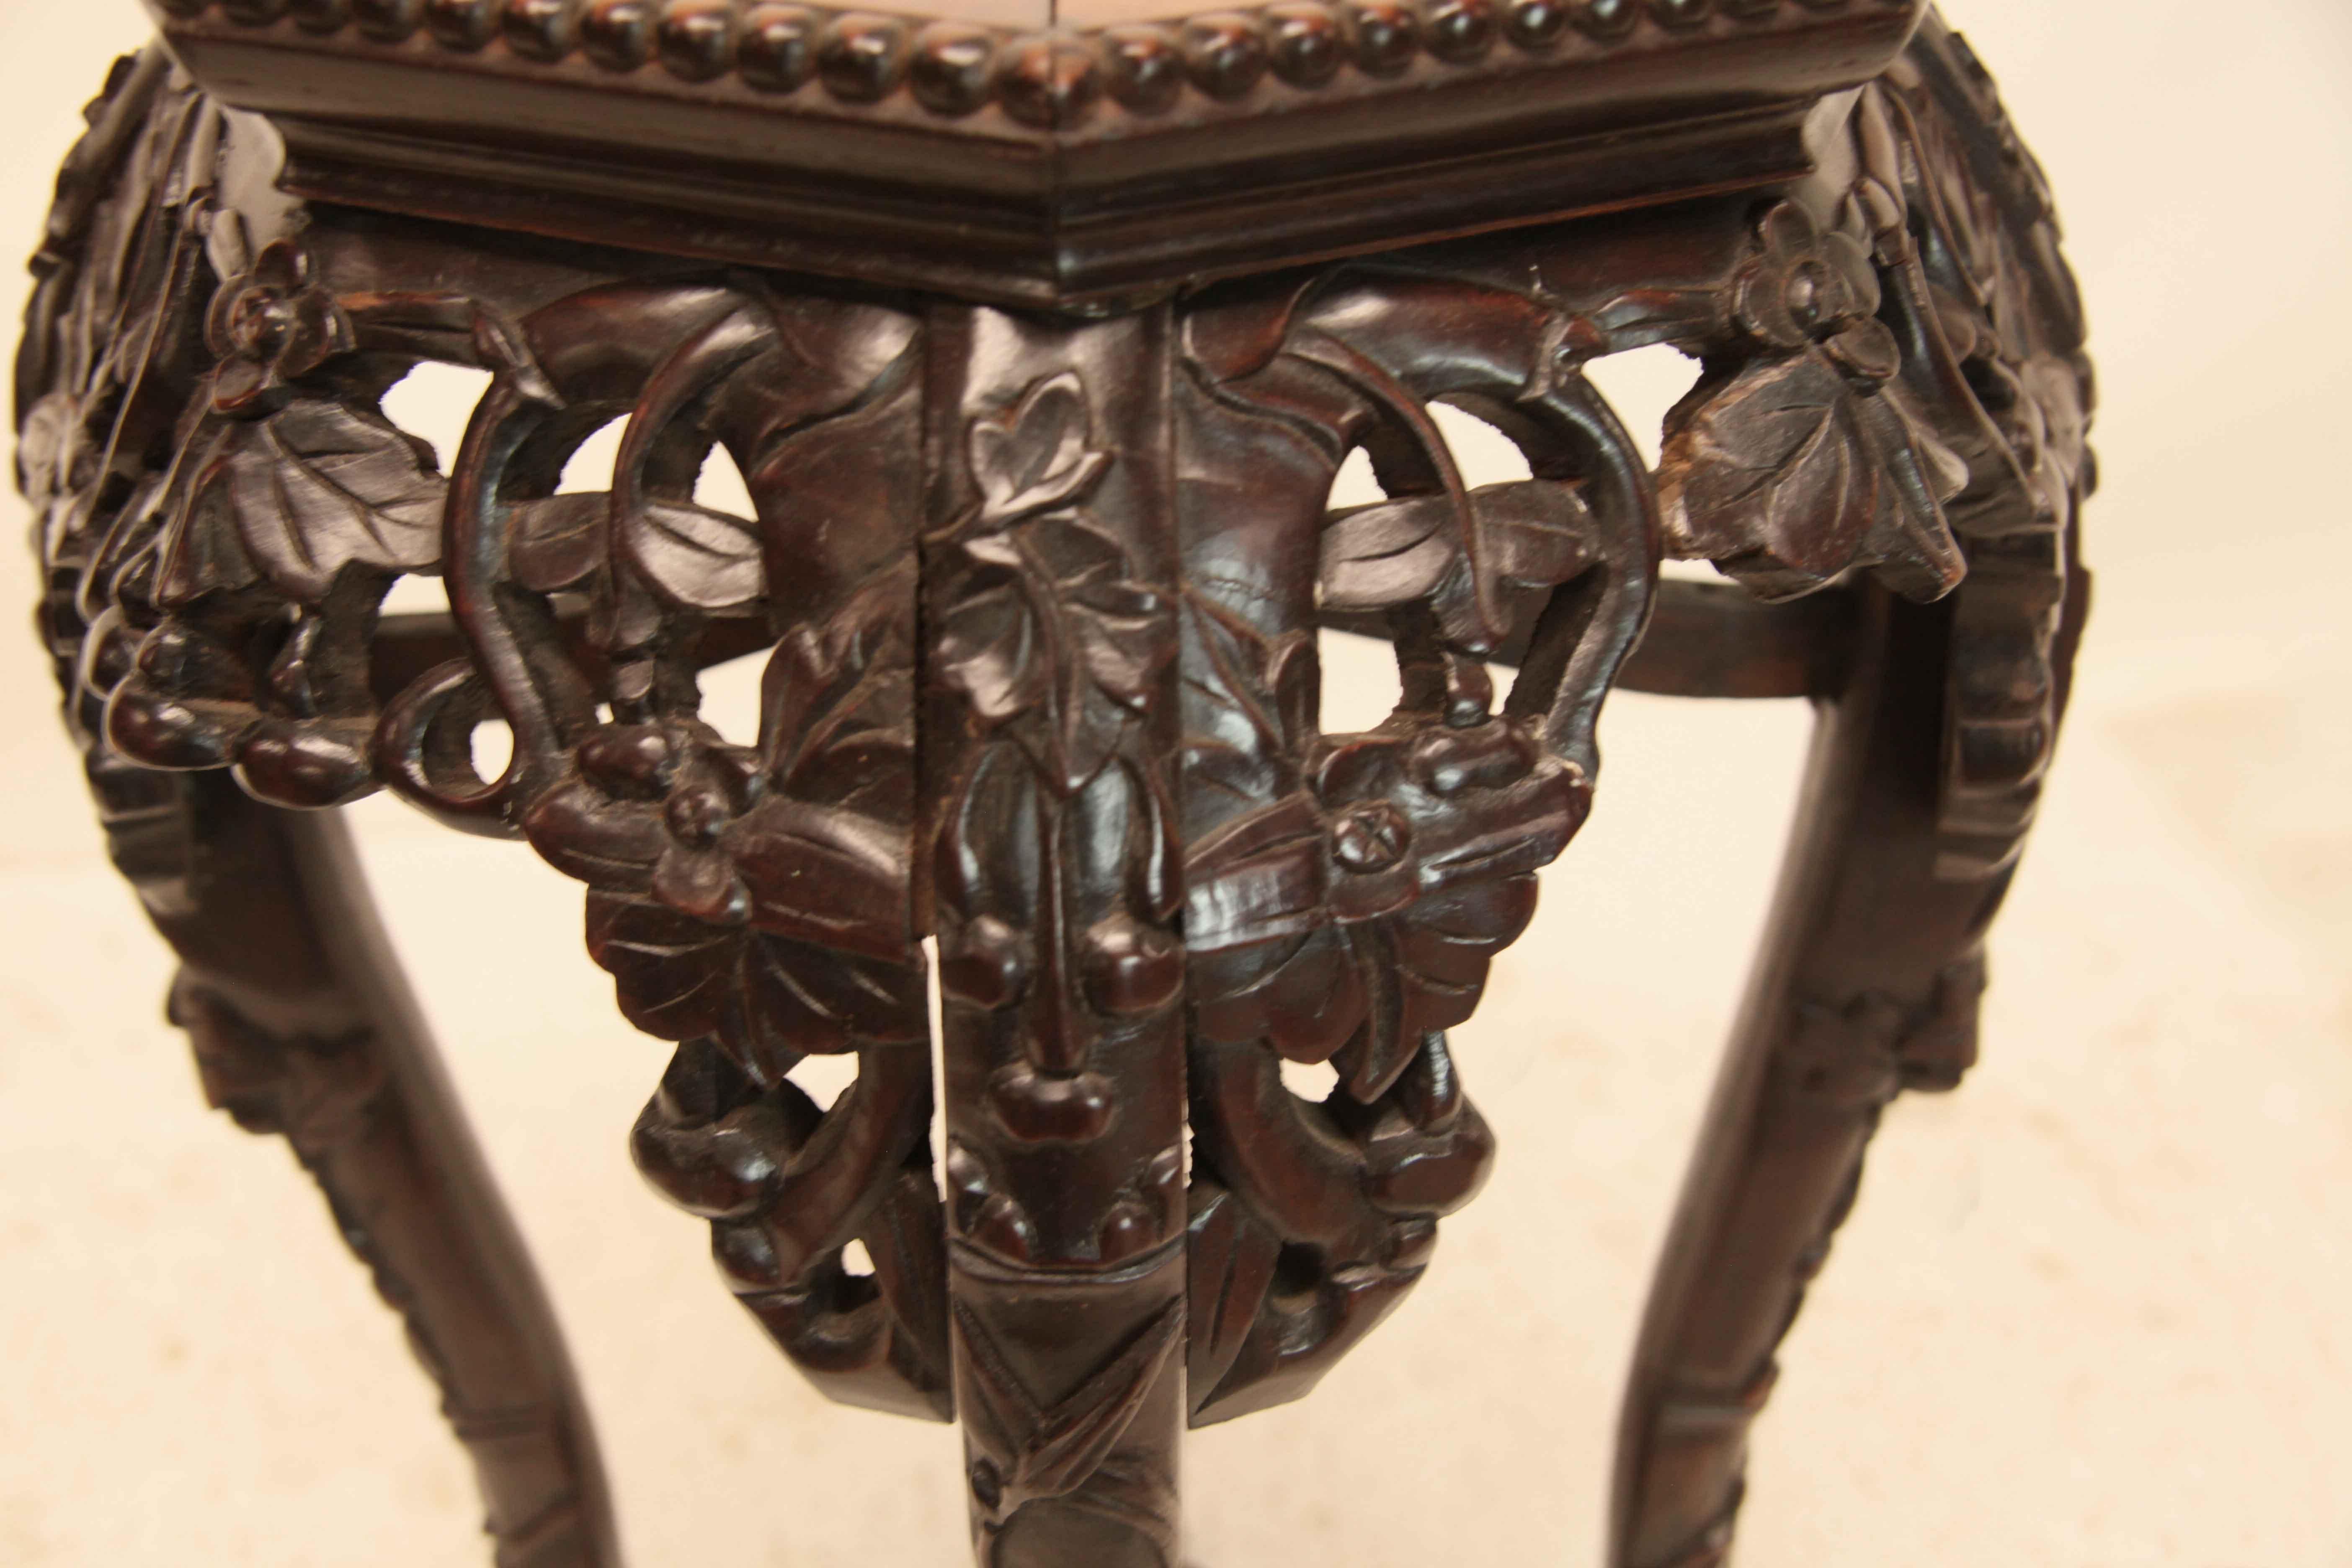 Chinese teak wood stand, the hexagonal top with a beaded edge has a marble inset which is similar to rojo breccia, below is a repeated pattern around the stand of reticulated carving in high relief featuring stylized flowers and foliate; the